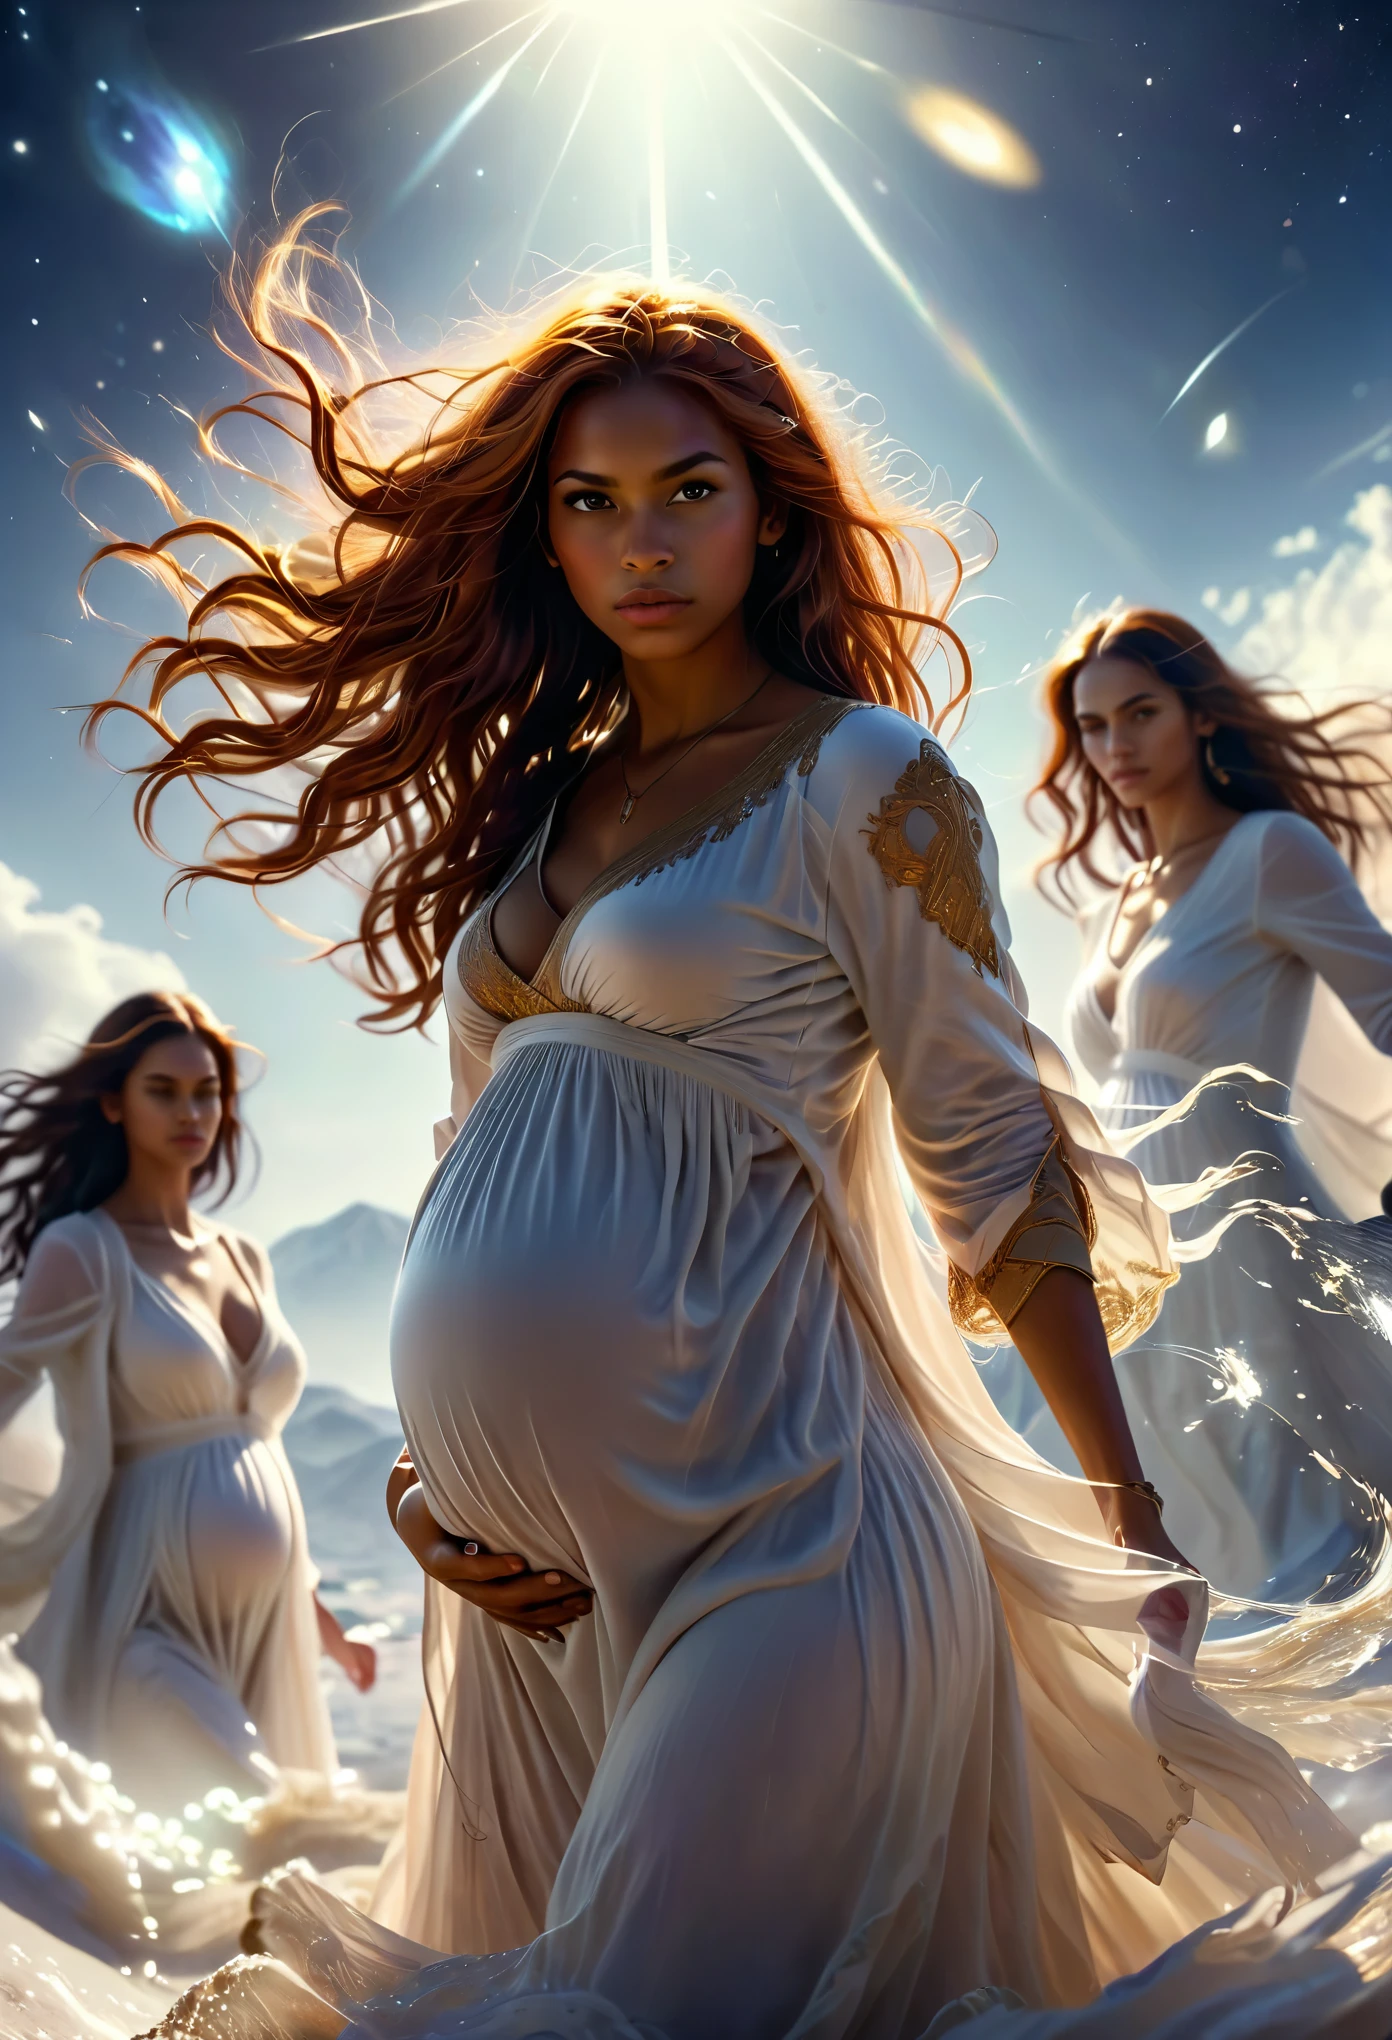 In a celestial landscape, four people dressed luxuous, differents faces, they are all darkskin, (((young, in 20's))) (((two brown skin men and two brown skin woman))), (((two young brown skin long dark hair duke:1.3))), (((one brown skin dark hair pregnant1.5 woman))) and (((one long ginger hair woman pregnant1.3))), (only one woman pregnant:1.7), (they are two différent and separate couple1.2). (Two couple of four people:1.2). The first couple is a brown skin duke long dark curly hair with a ginger long hair pregnant woman. The second couple is a brown skin duke curly dark hair with a short brown hair woman, (((ginger hair brown skin woman and dark hair woman are pregnant and brownskin:1.5))) trying to kill him with swords, dangerous scene, war, battle, 8K, extremely detailed, high quality, (photorealistic:1.37), Full body, vibrant colors, perfect lighting, soulful expressions, celestial aura, majestic presence, dreamlike atmosphere, 8 k artistic photography, photorealistic concept art, soft natural volumetric cinematic perfect 
